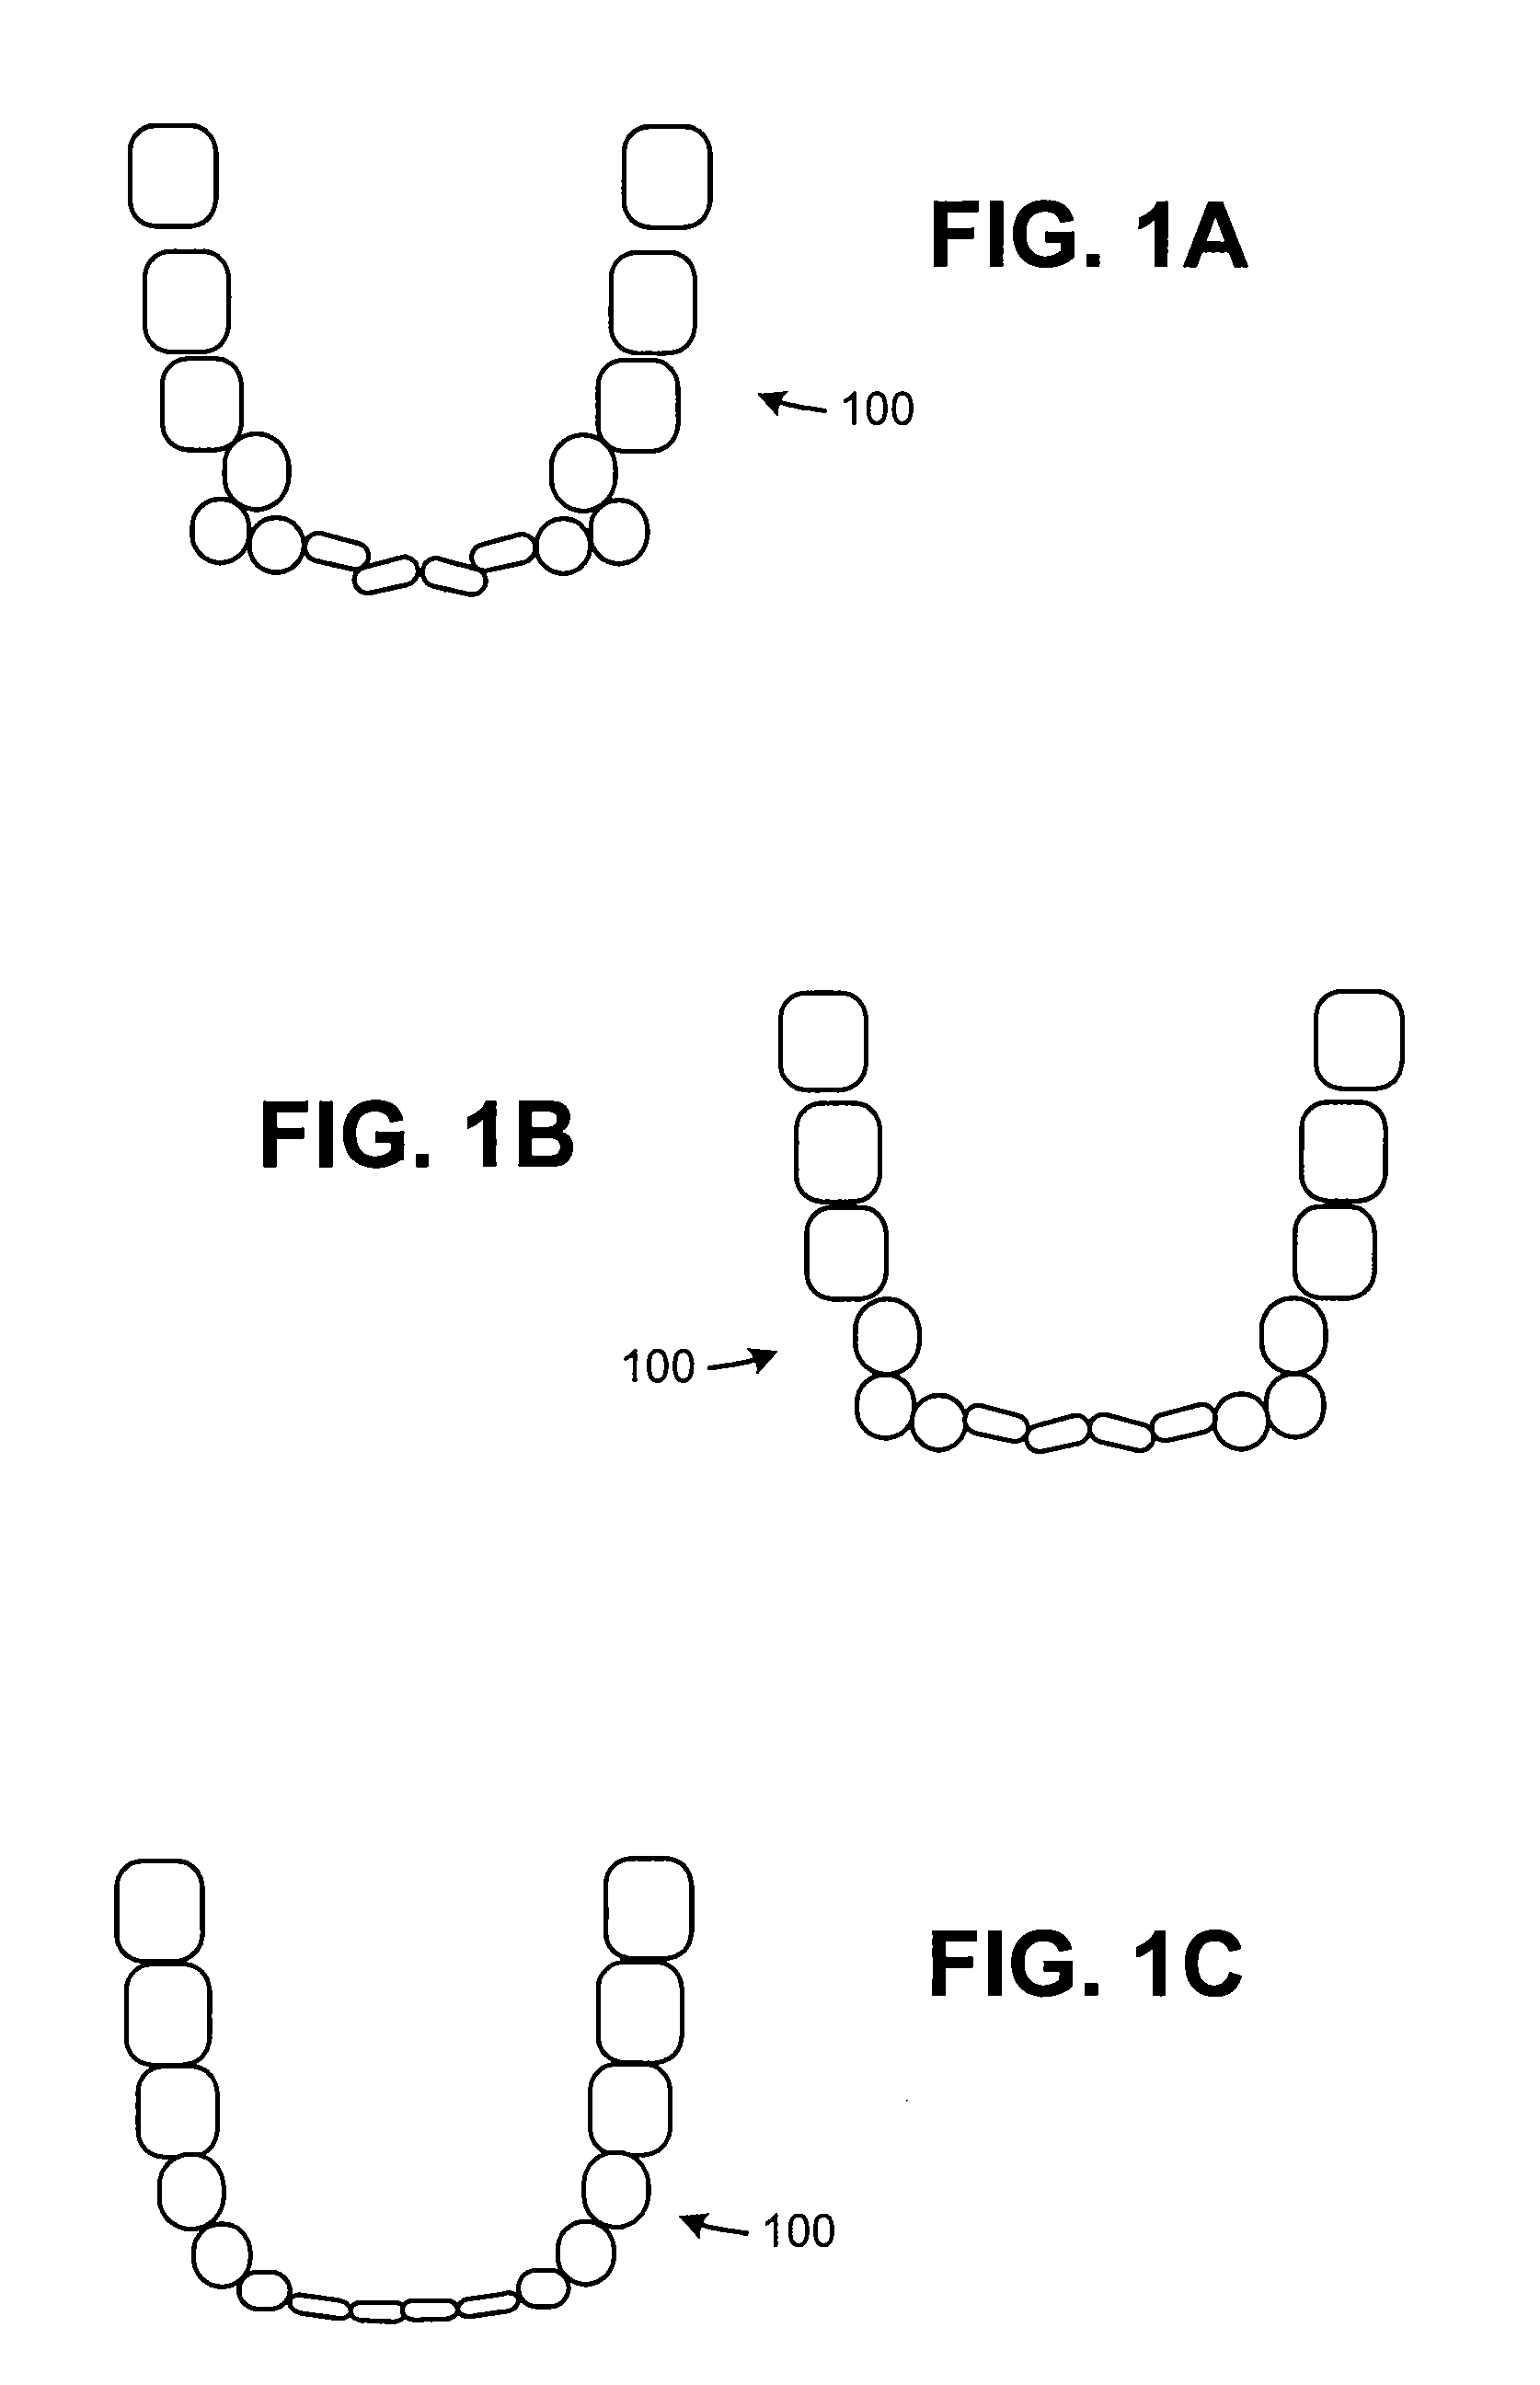 System and method for automatic construction of orthodontic reference objects